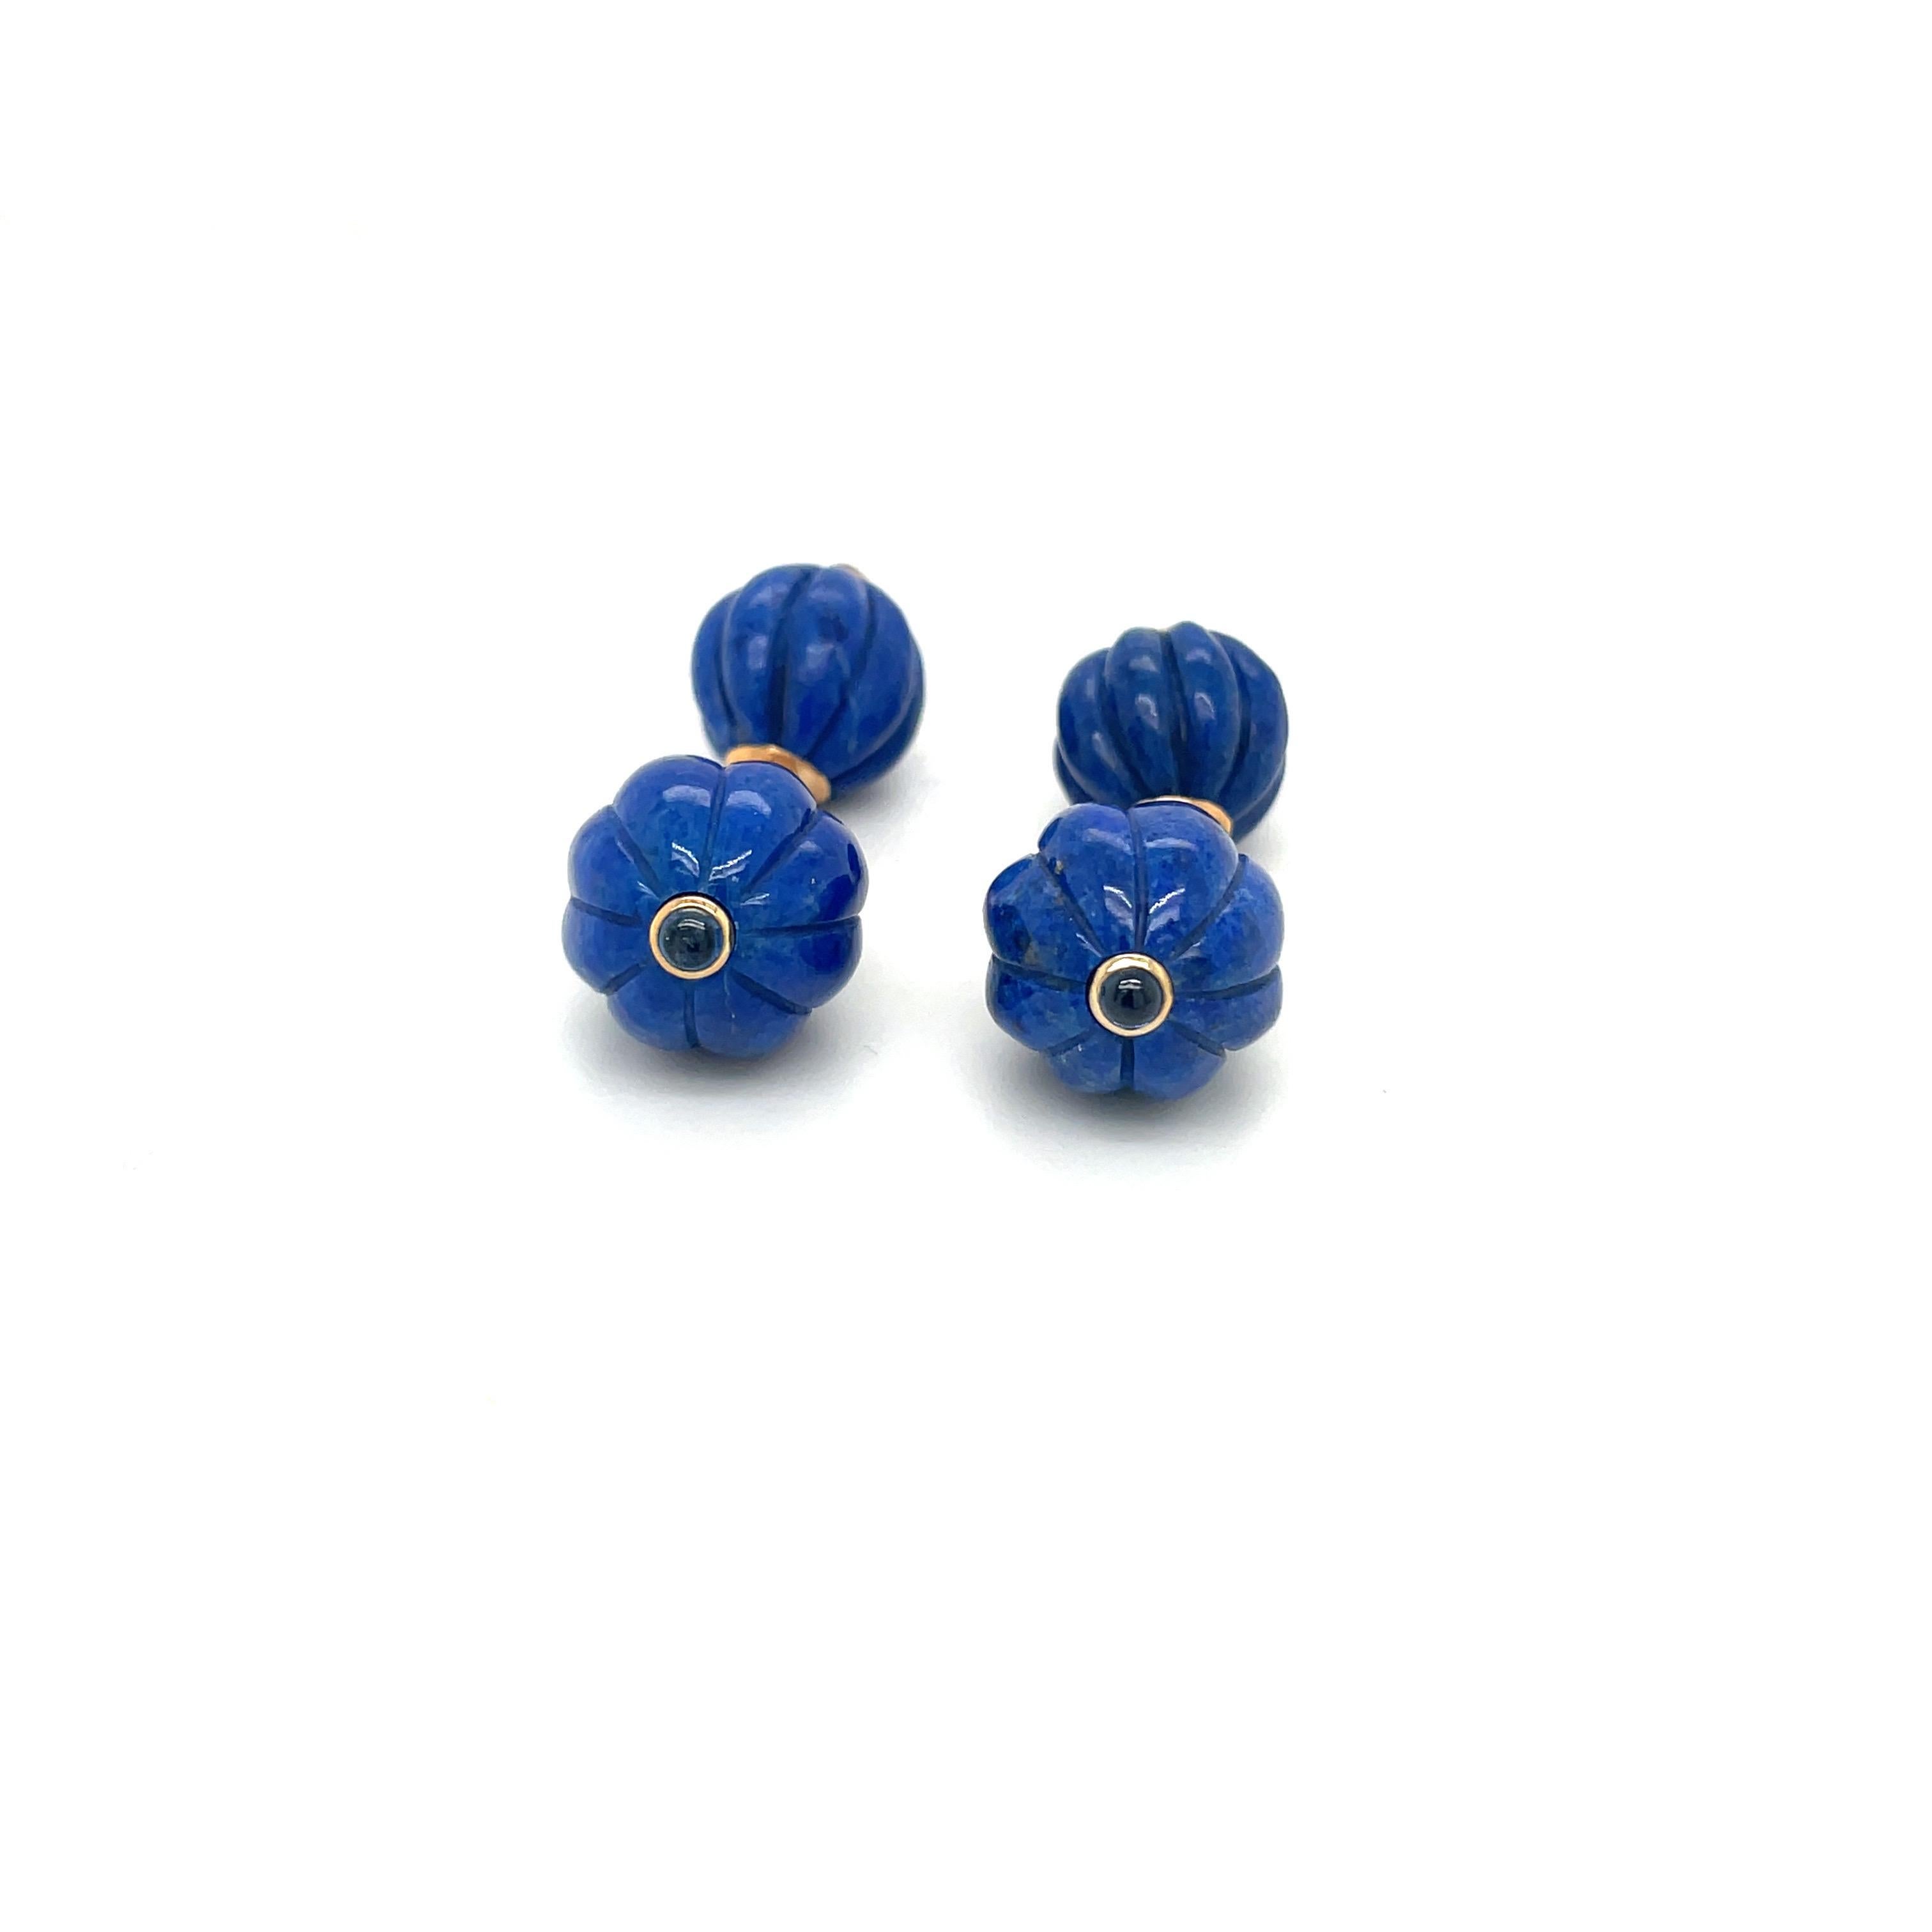 Beautiful polished  Lapis Lazuli  fluted bead cuff links. Each center is set with a blue sapphire cabochon. The stones are held together with a 14 karat gold link chain.
Stamped Trianon 14k